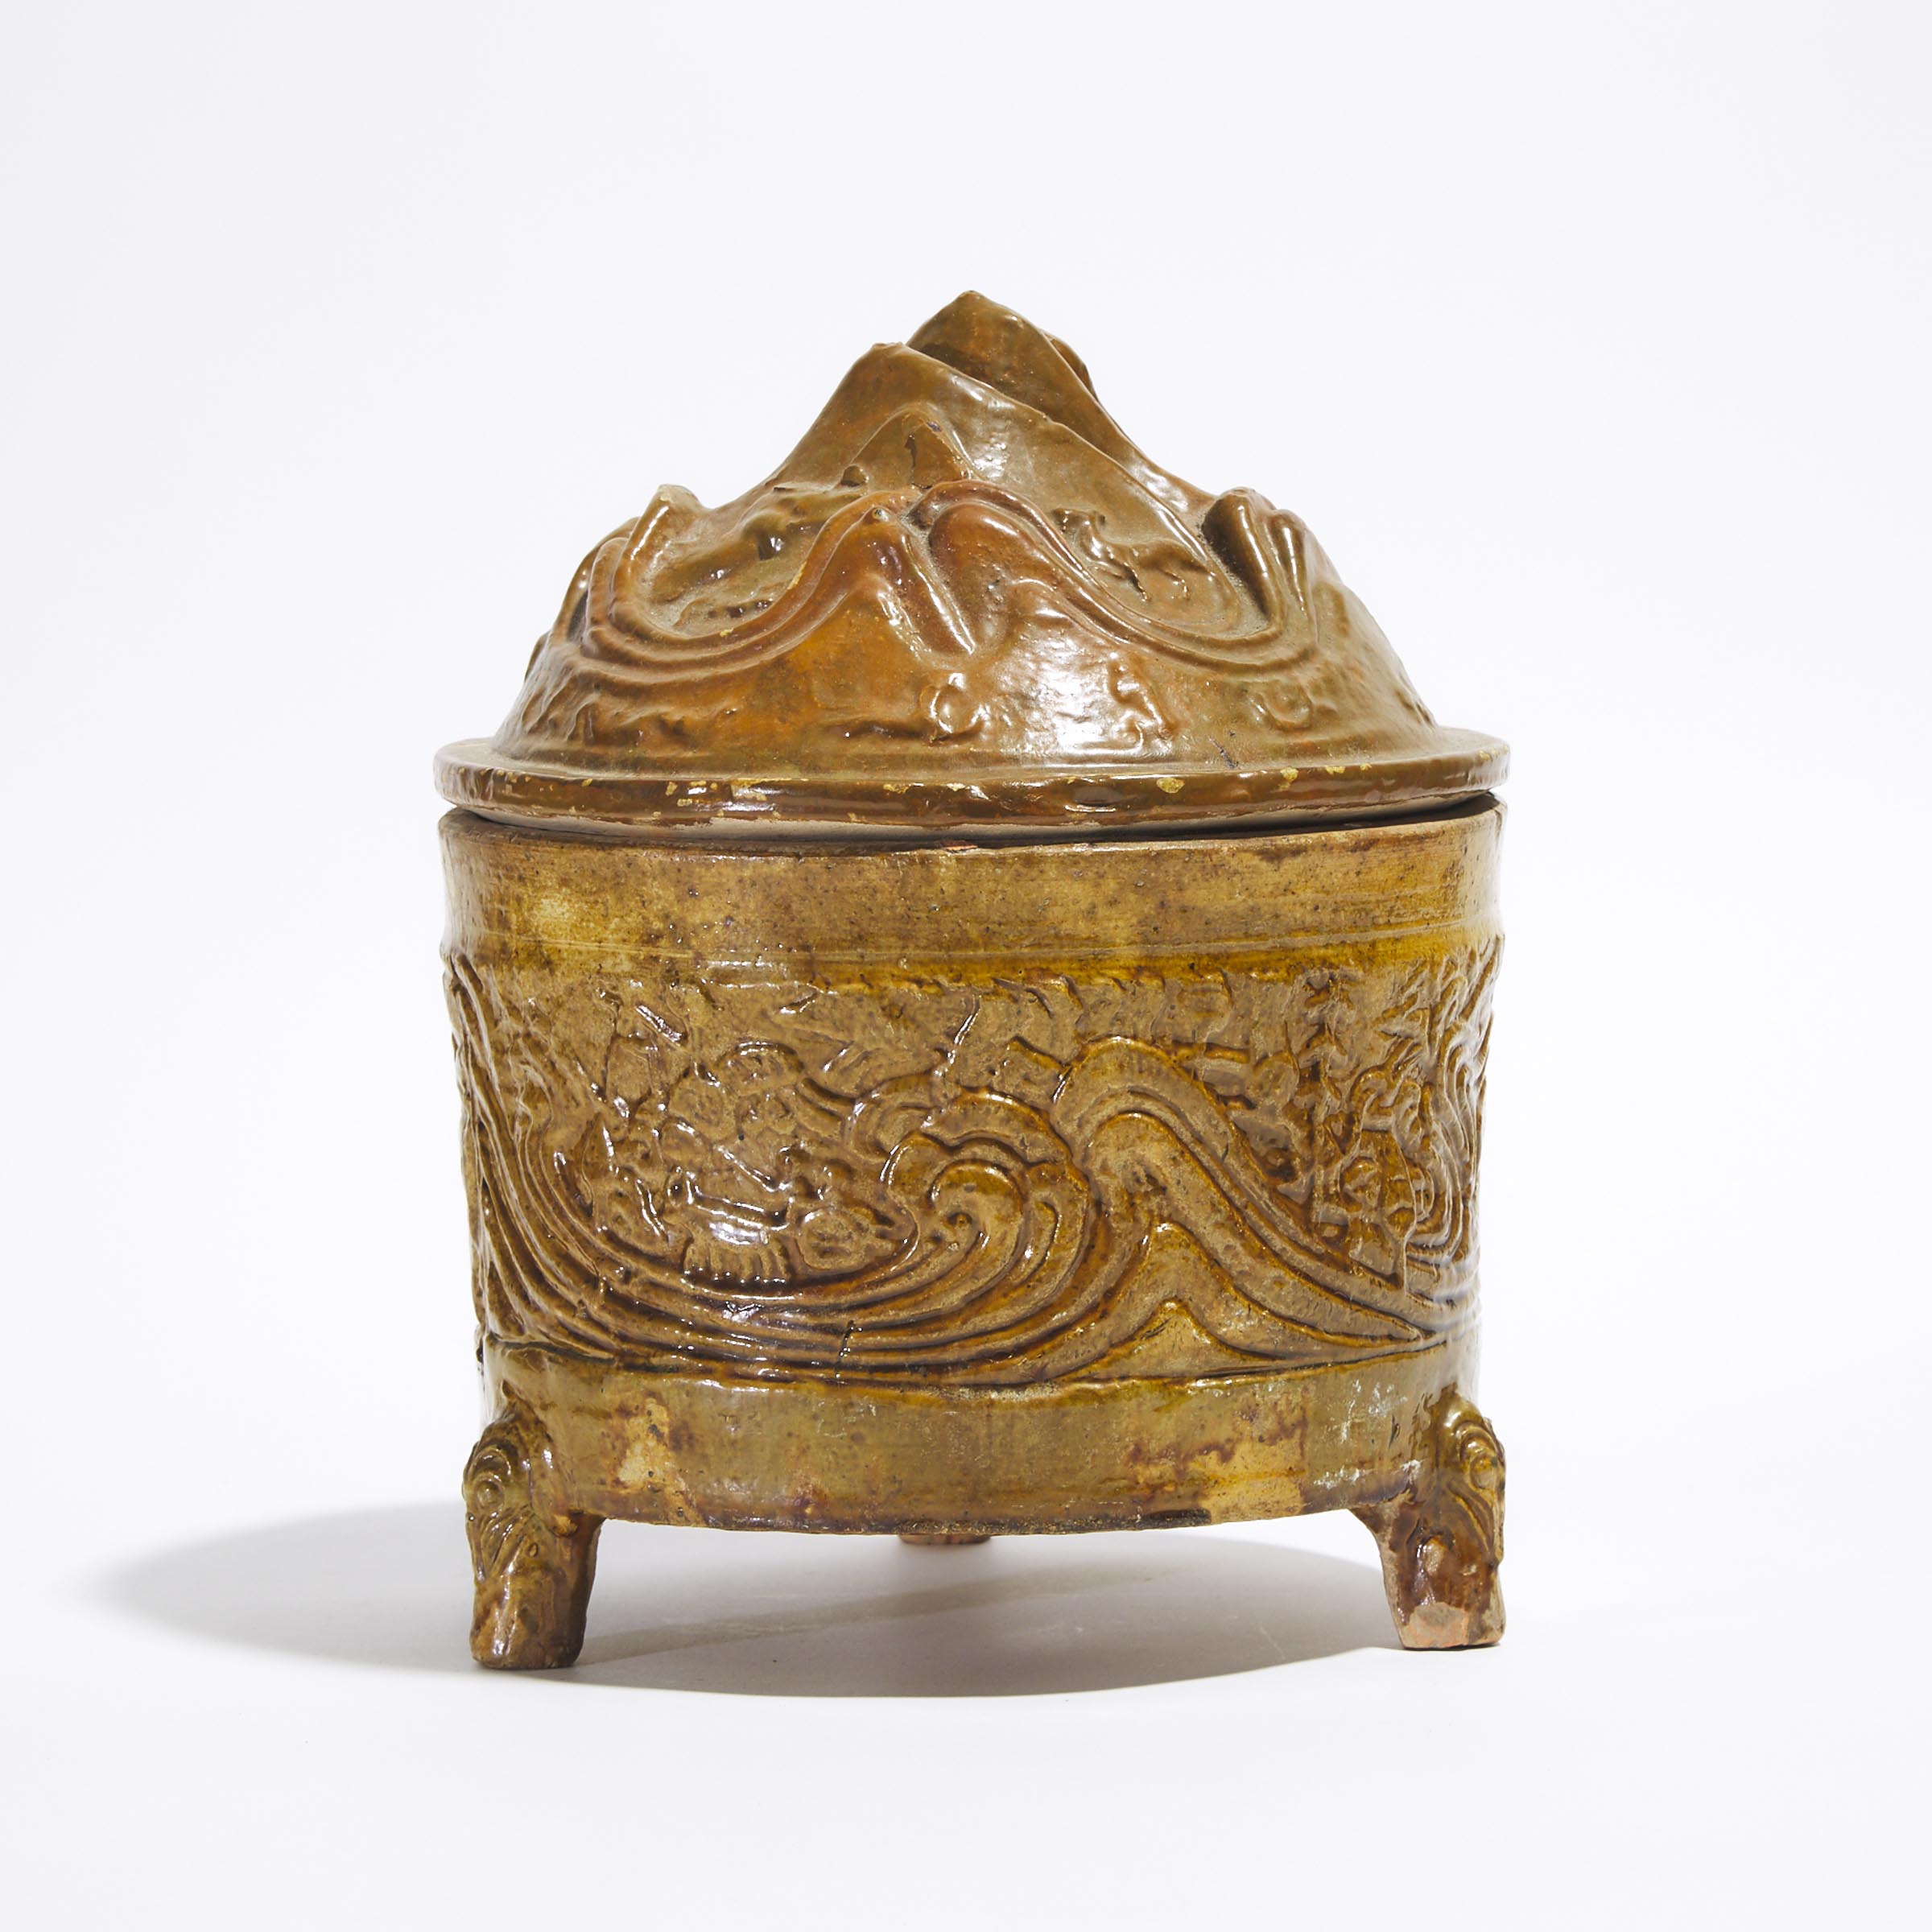 An Amber-Glazed Pottery Cylindrical 'Hill' Censer and Cover, Han Dynasty (206 BC - AD 220)